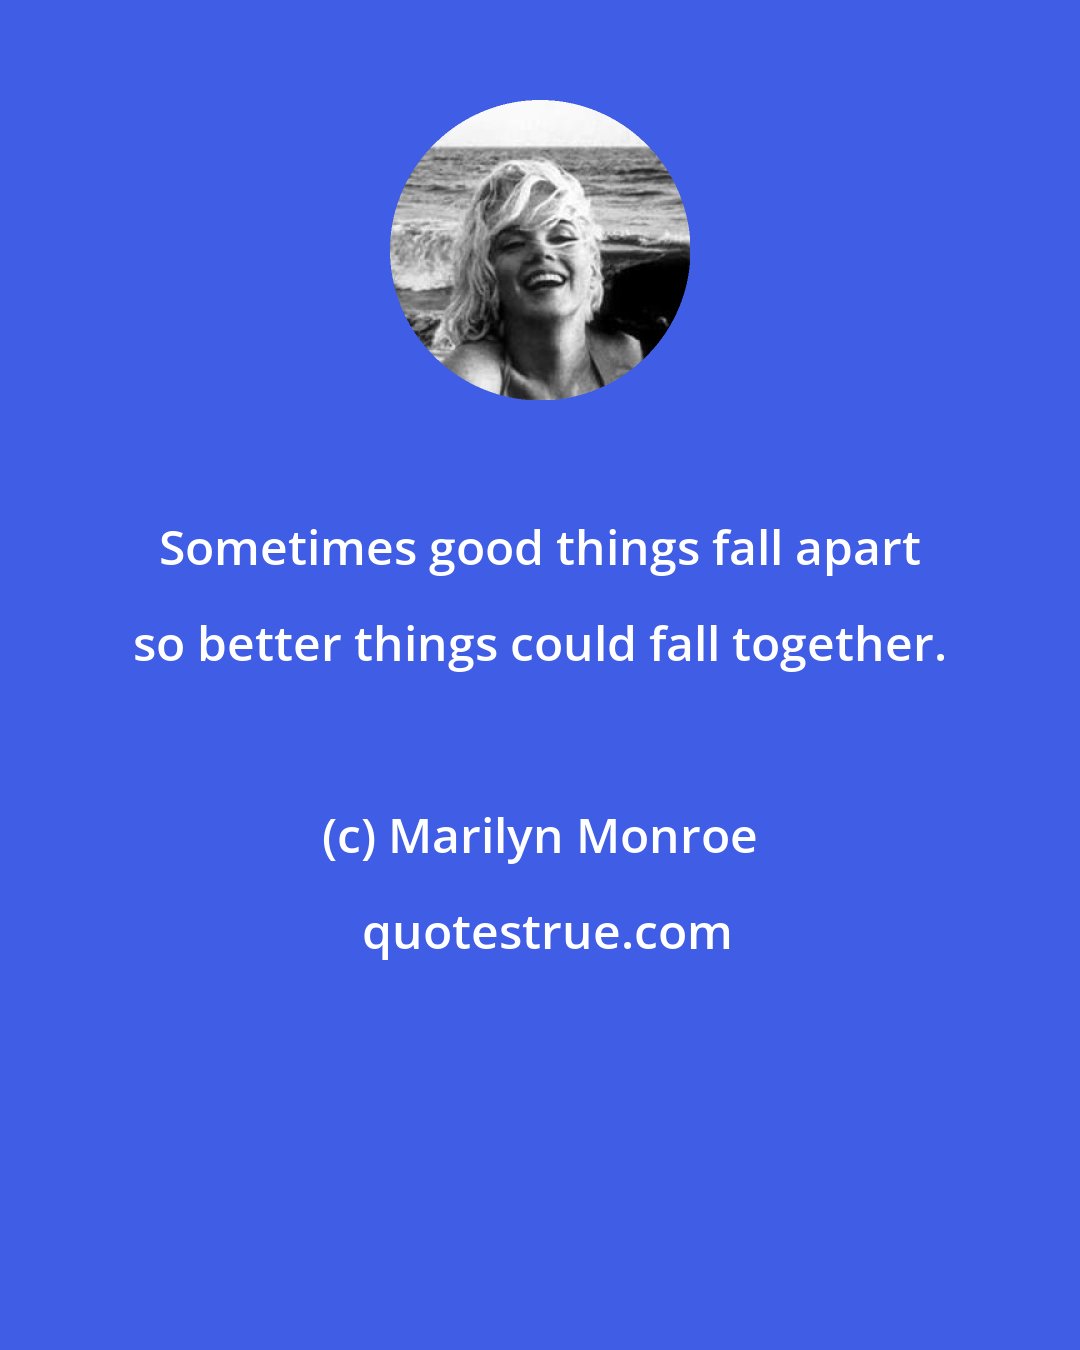 Marilyn Monroe: Sometimes good things fall apart so better things could fall together.